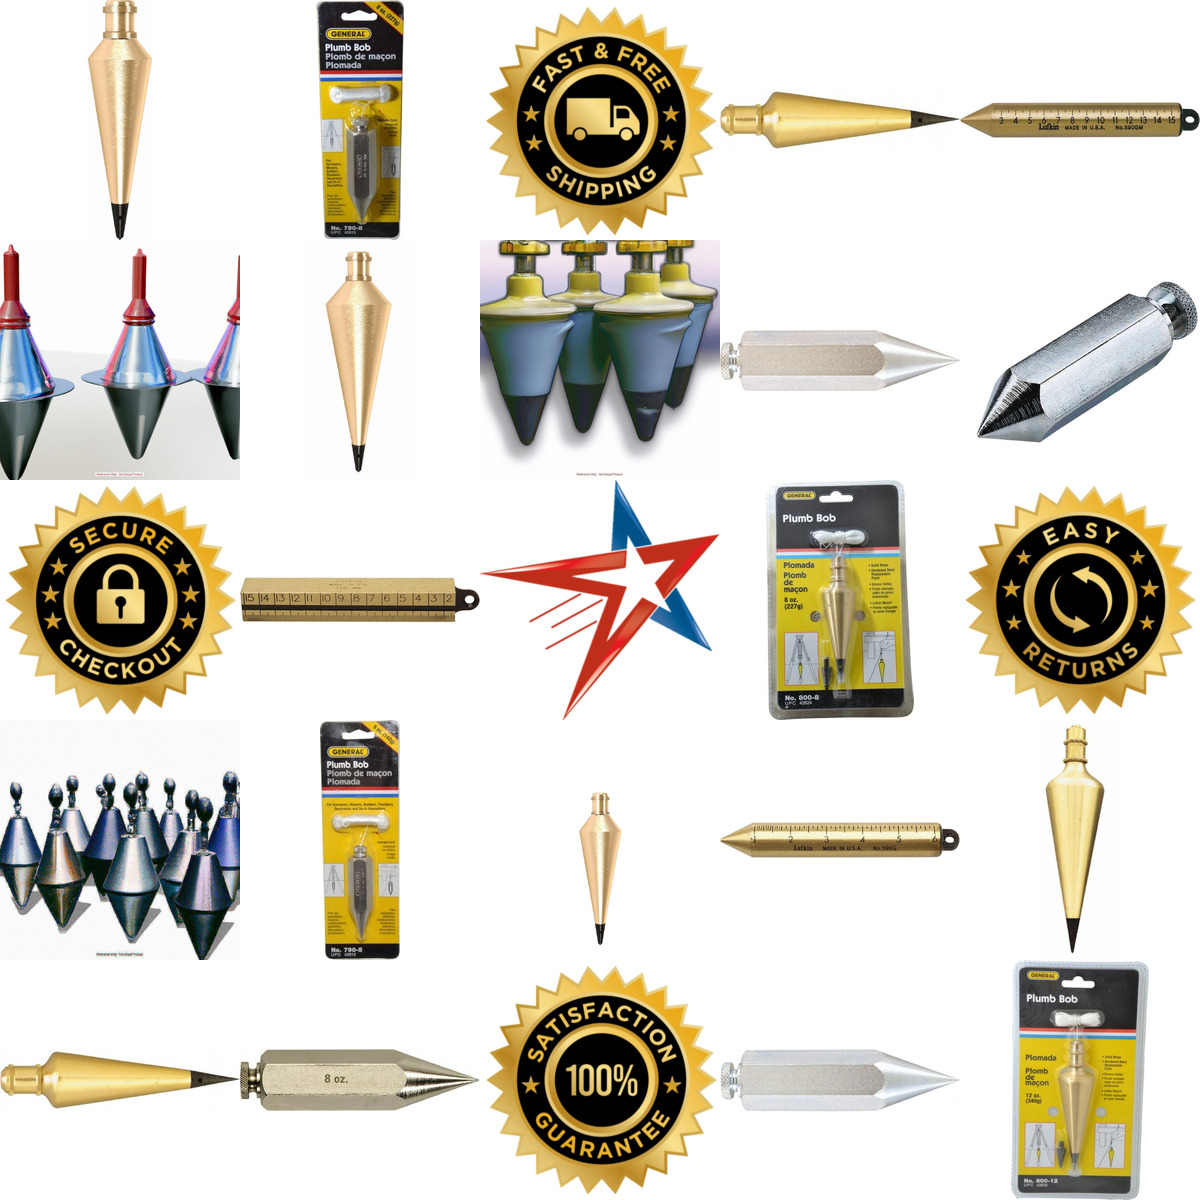 A selection of Plumb Bobs products on GoVets